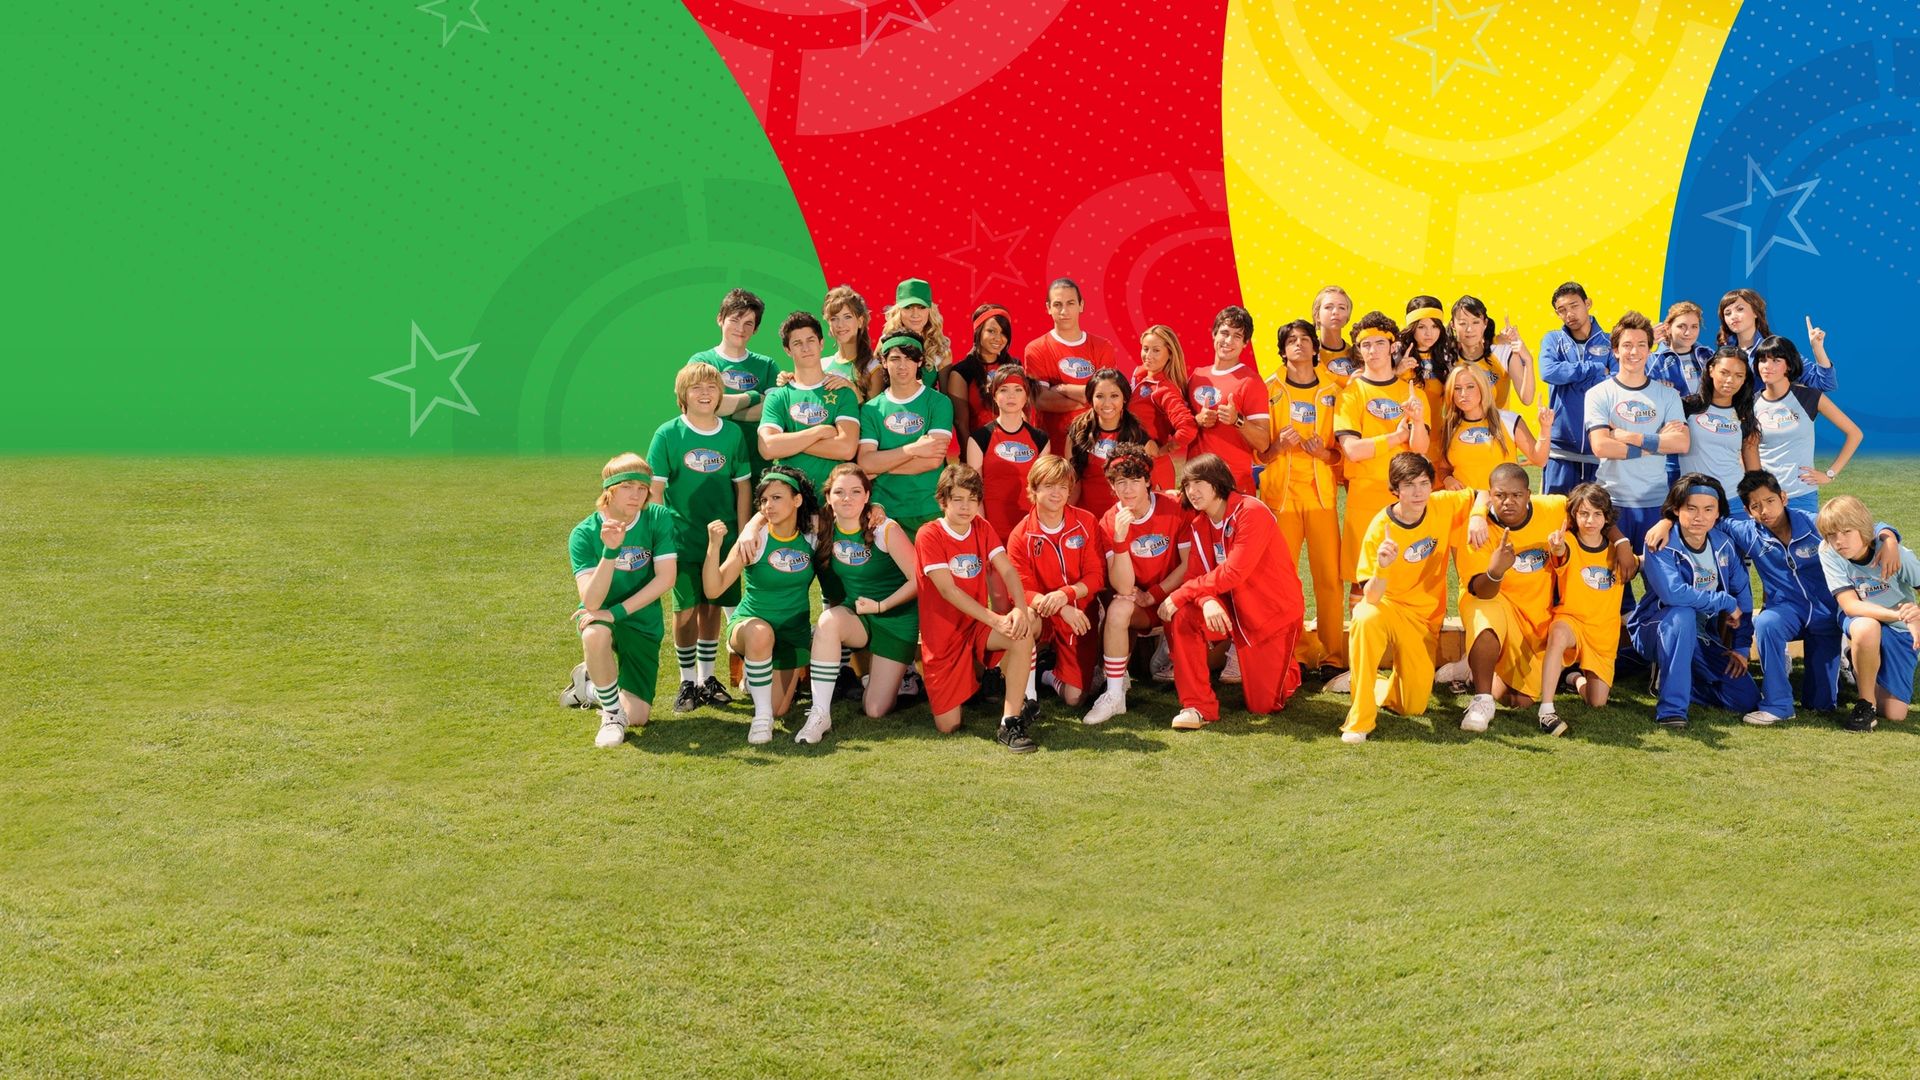 The Disney Channel Games background